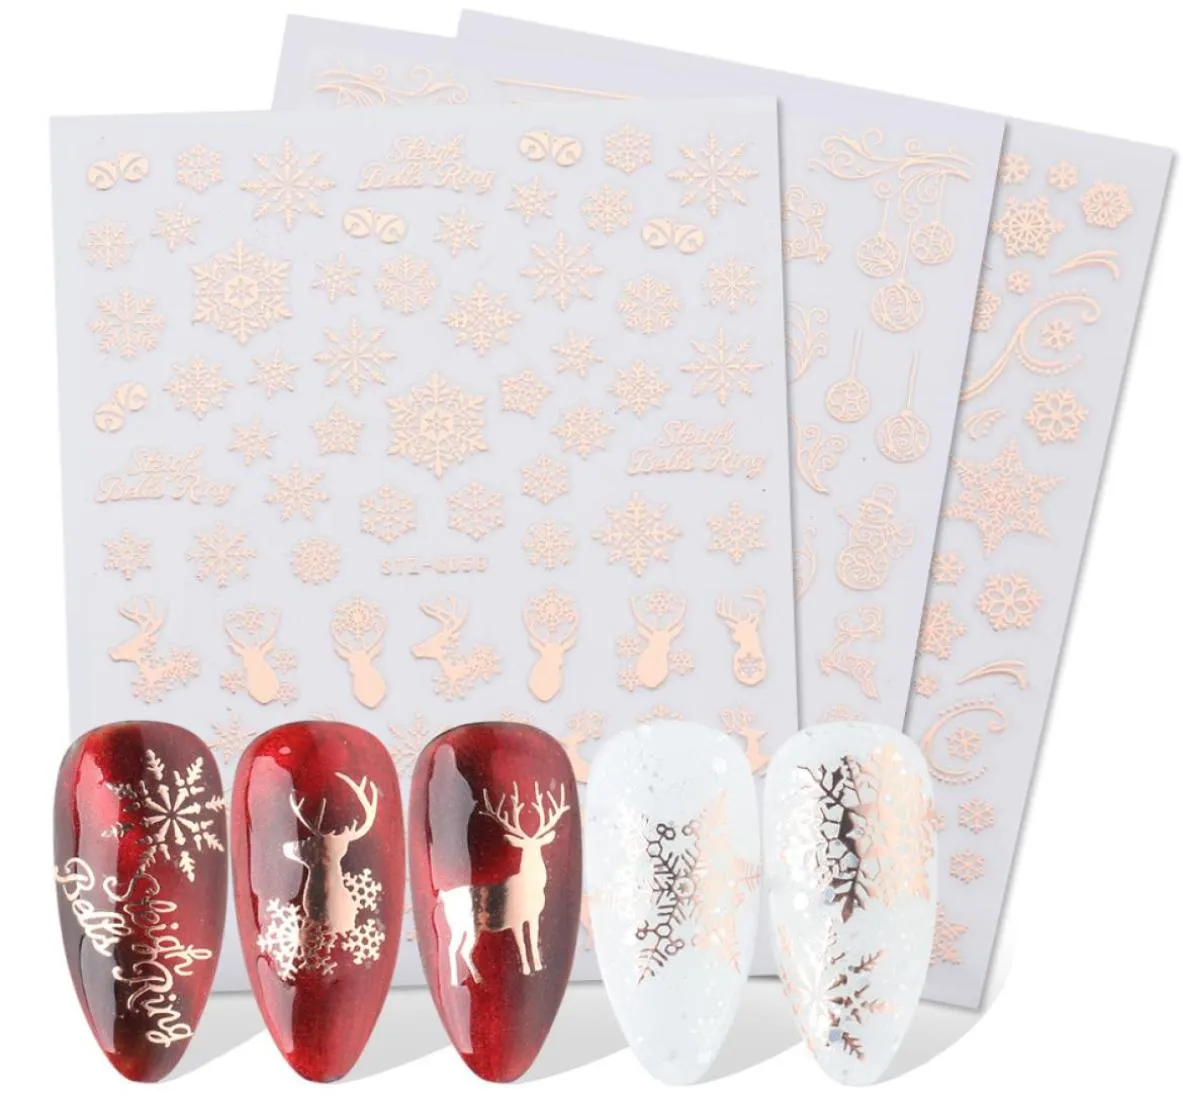 Christmas Nails Stickers Decals 3D Rose Gold Snowflake Elk Pattern DIY Decoration Nail Art Tools Accessories for Women Girls Kids3053413